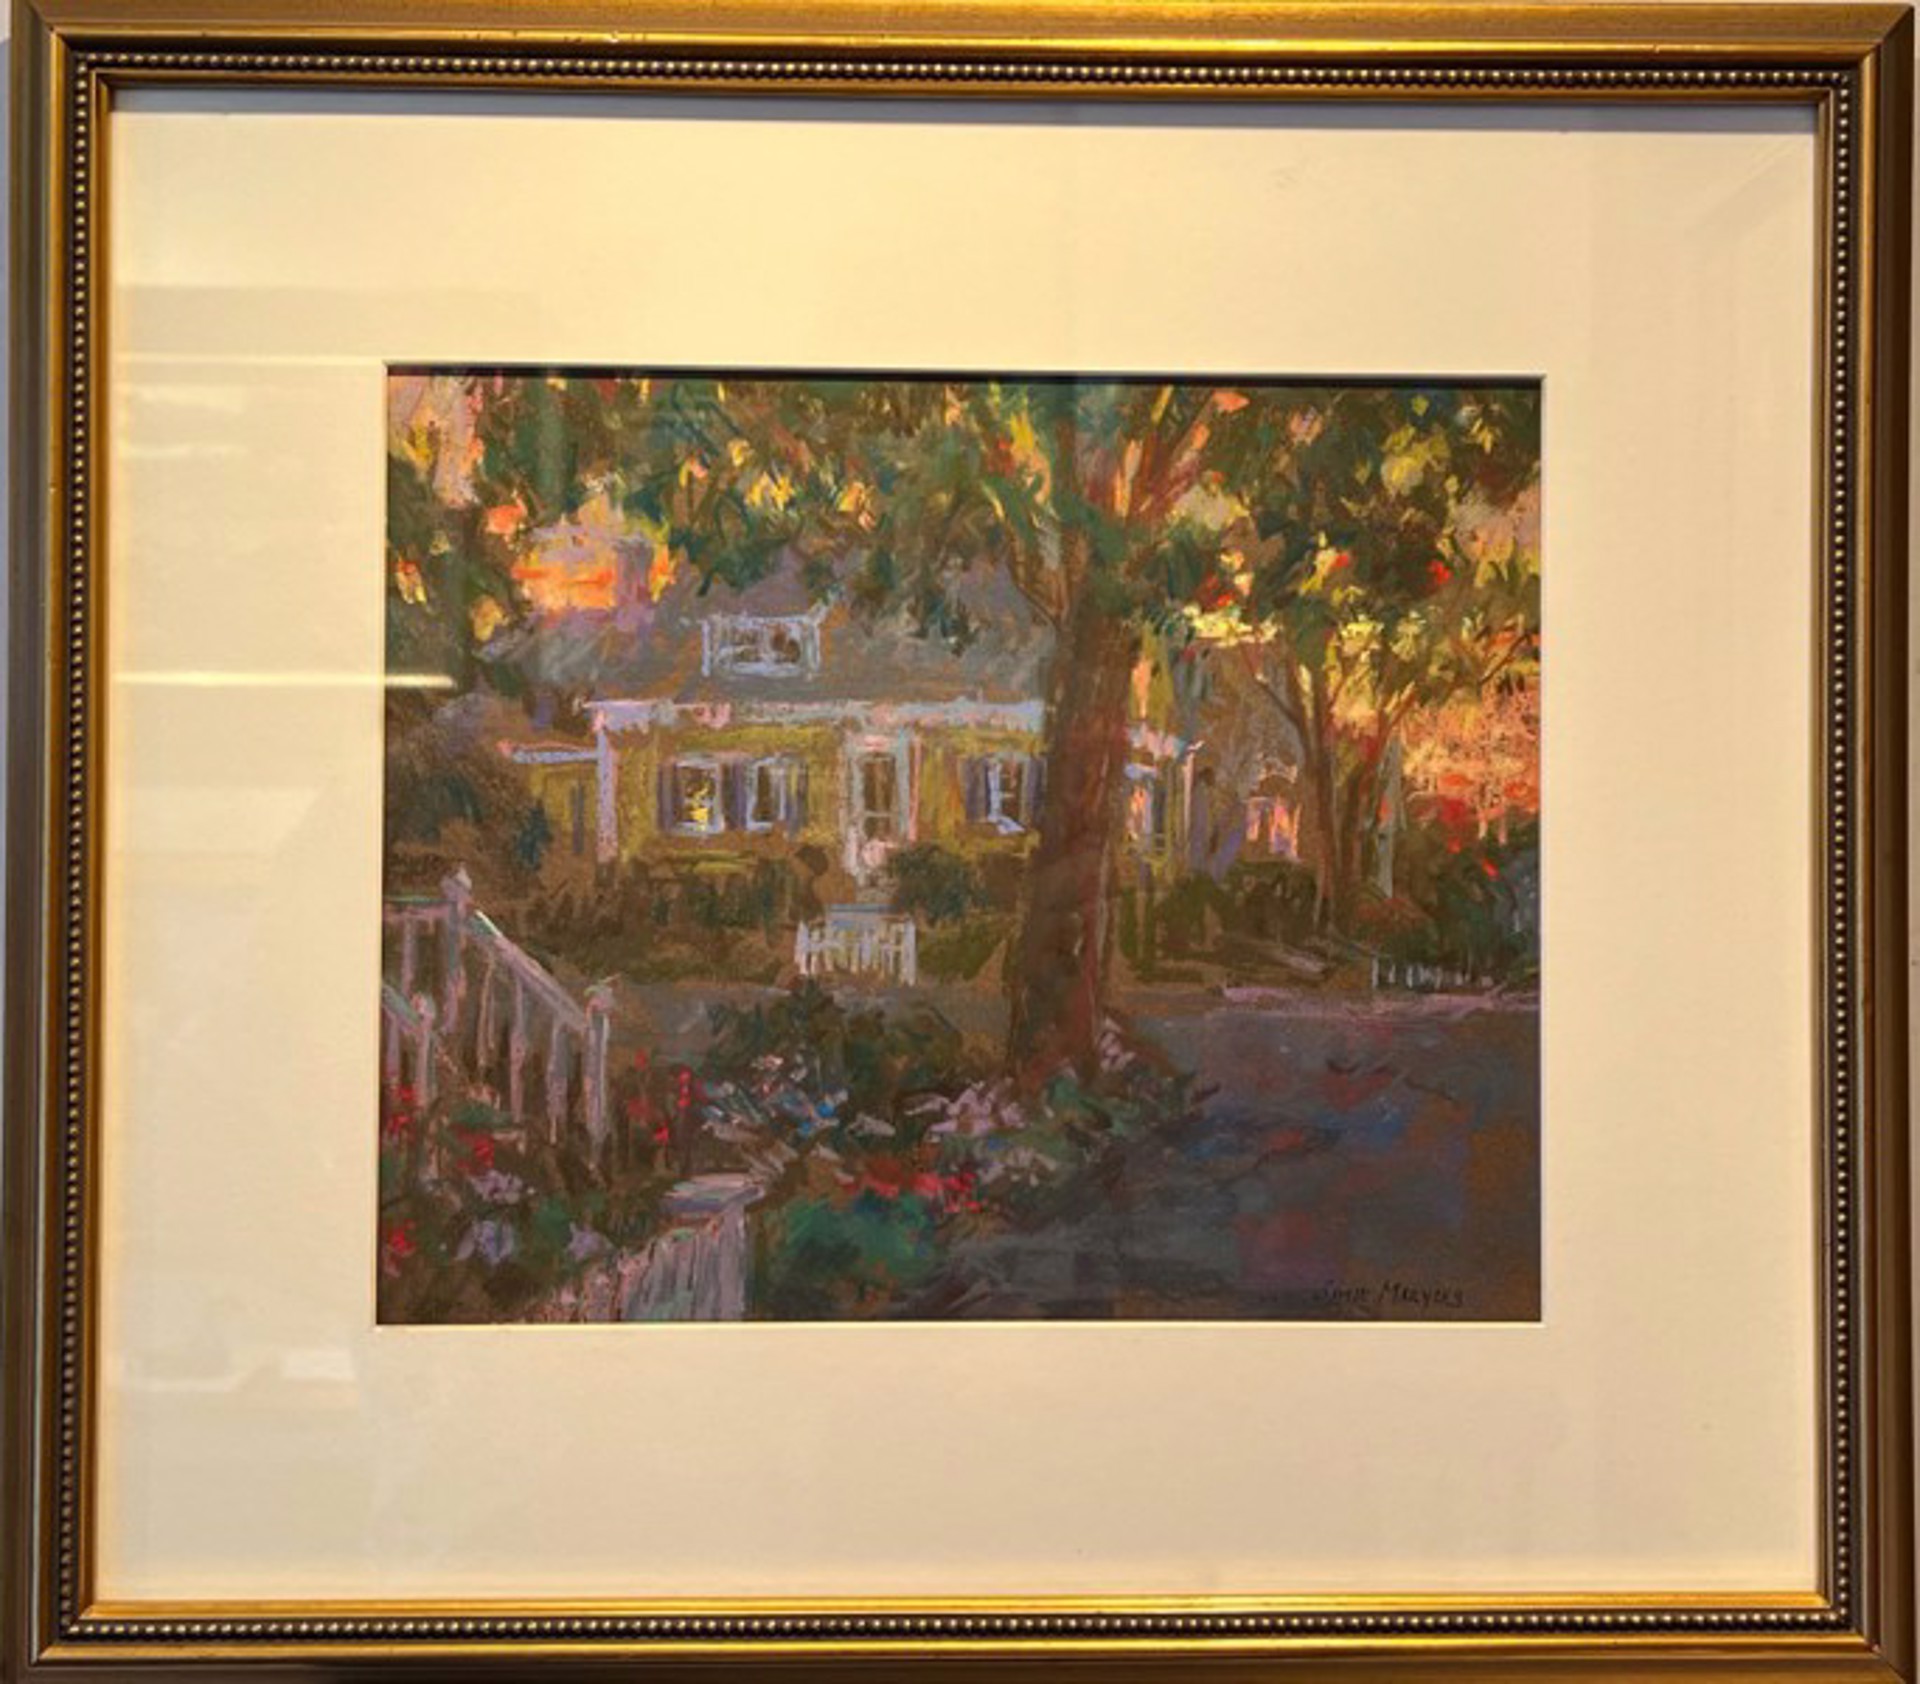 Provincetown Twilight, an historic piece circa 1995 by Simie Maryles